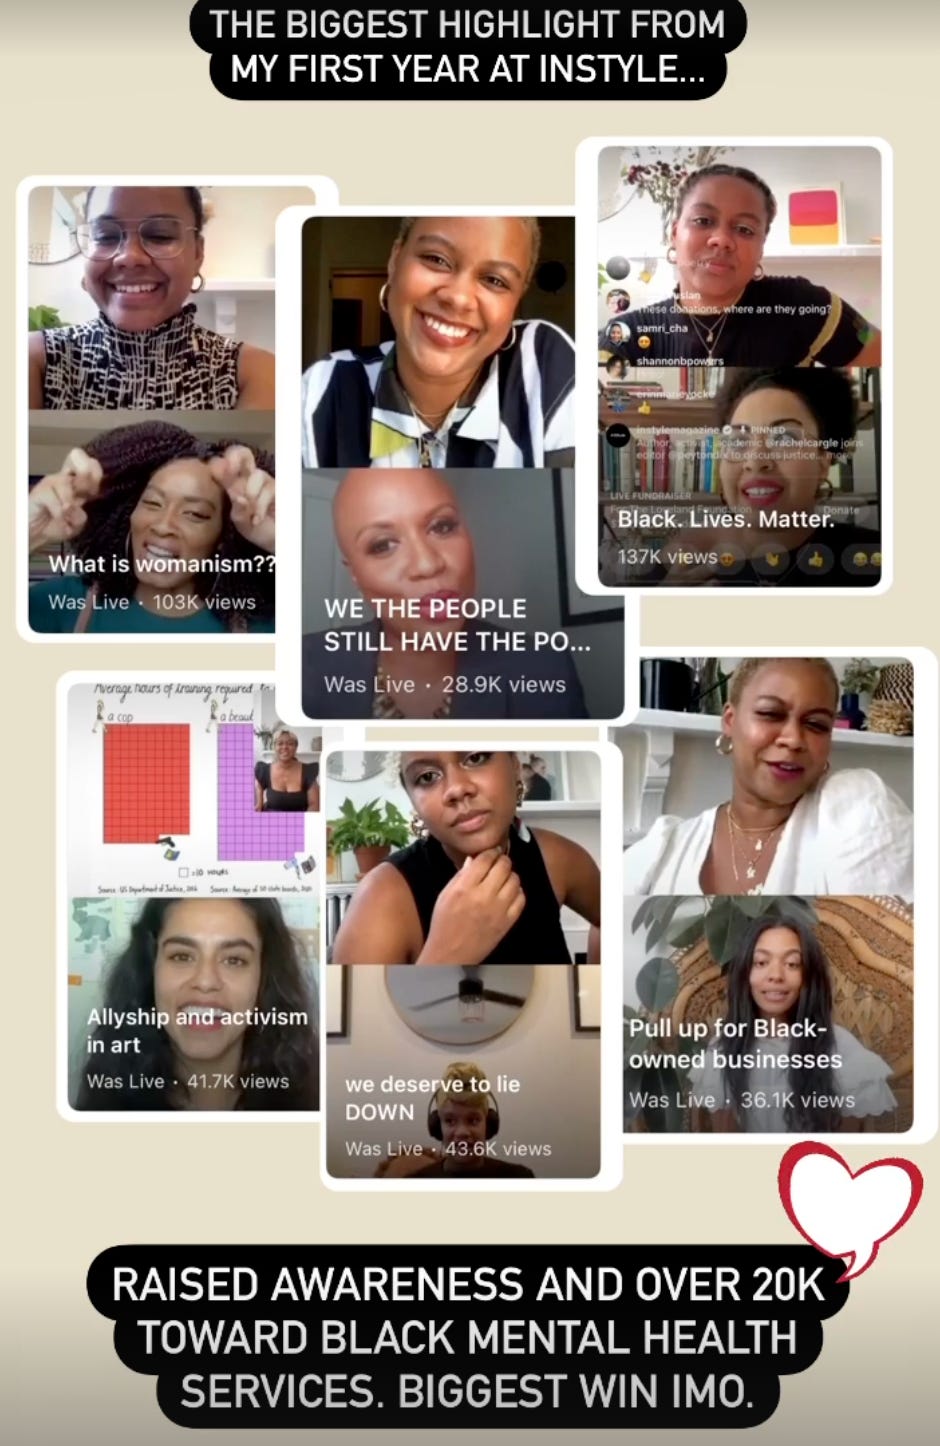 Screenshot of Peyton's IG Story with screenshots from IG Lives where she raised awareness and over 20K toward black mental health services.